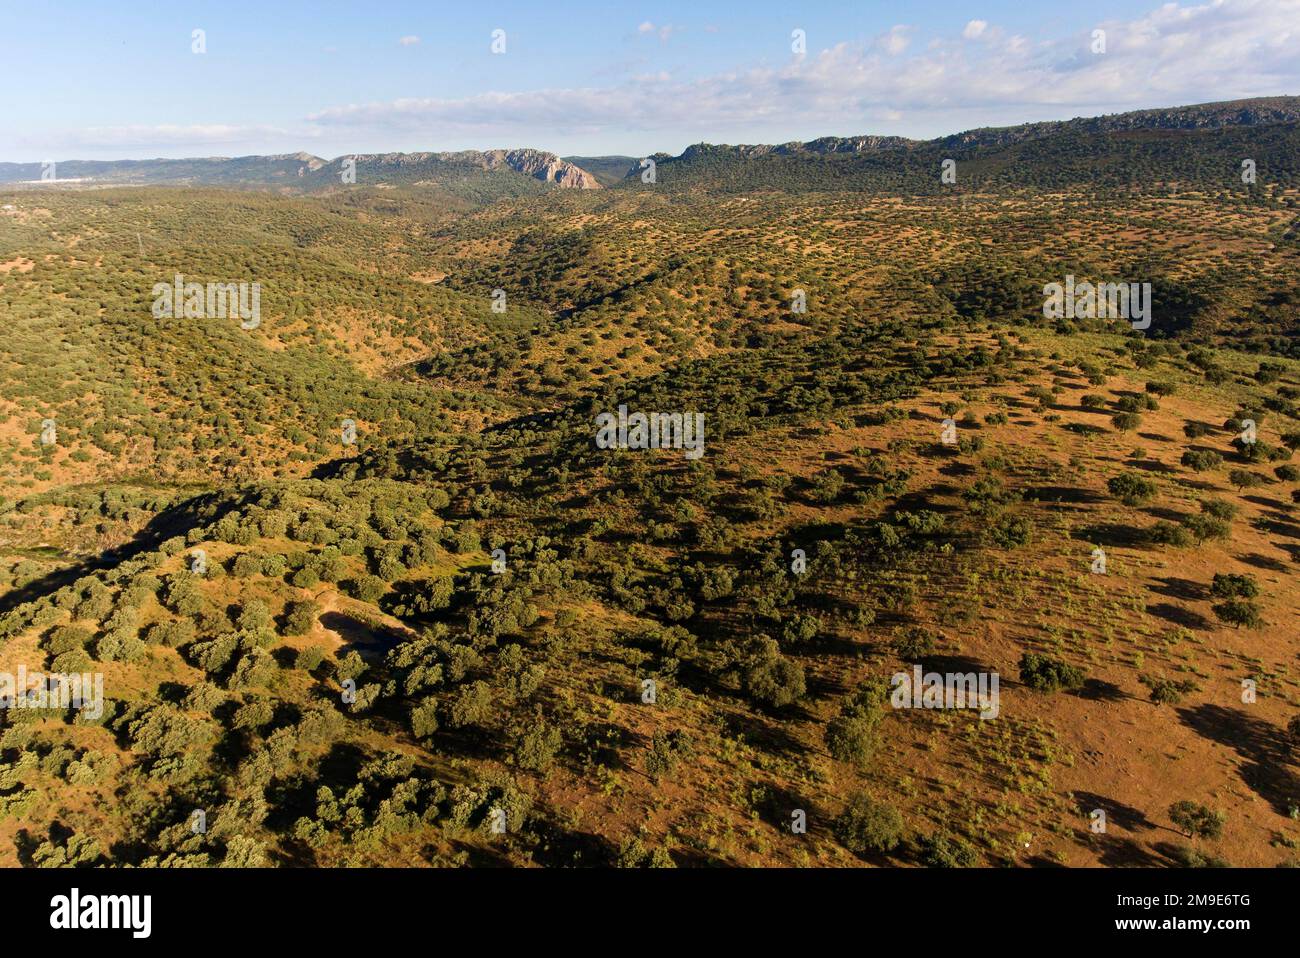 Dehesa, holm oak forest, aerial view, Monfraguee National Park, Extremadura, Spain Stock Photo